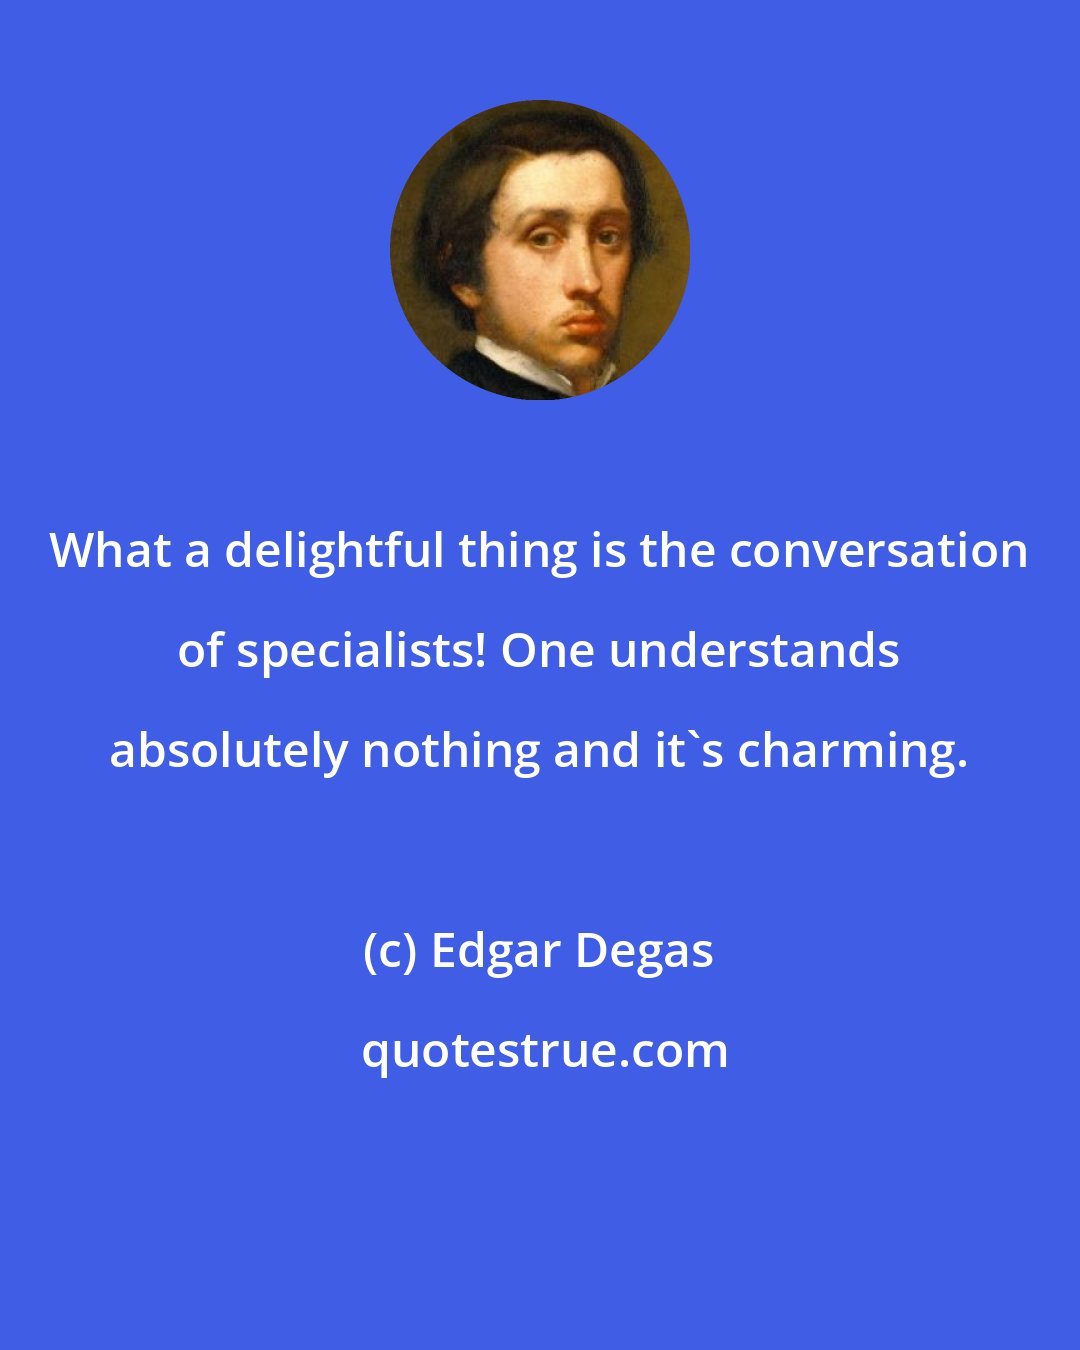 Edgar Degas: What a delightful thing is the conversation of specialists! One understands absolutely nothing and it's charming.